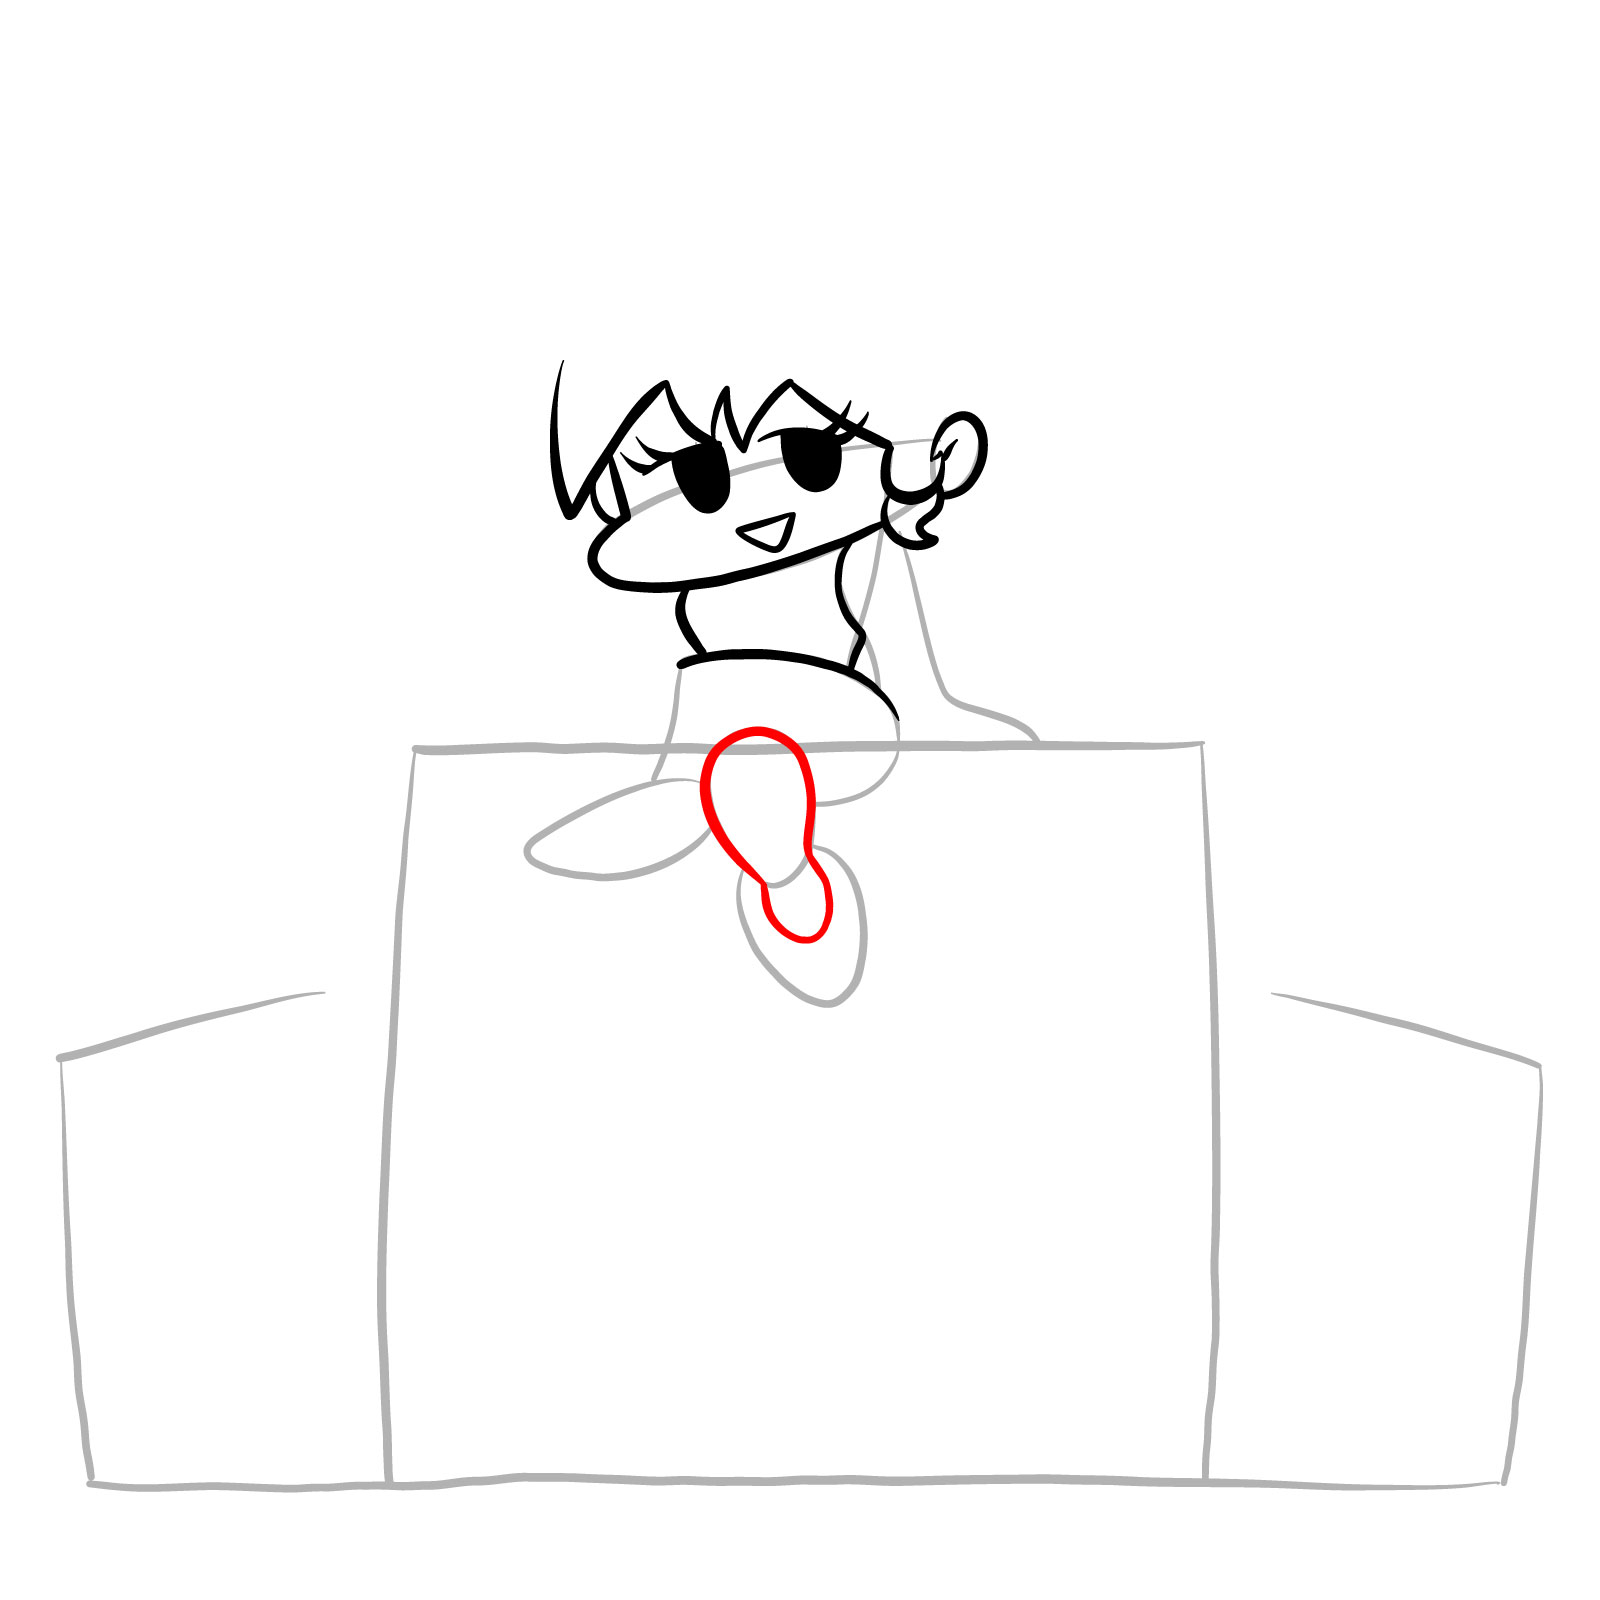 How to draw Girlfriend sitting on the speakers - step 11